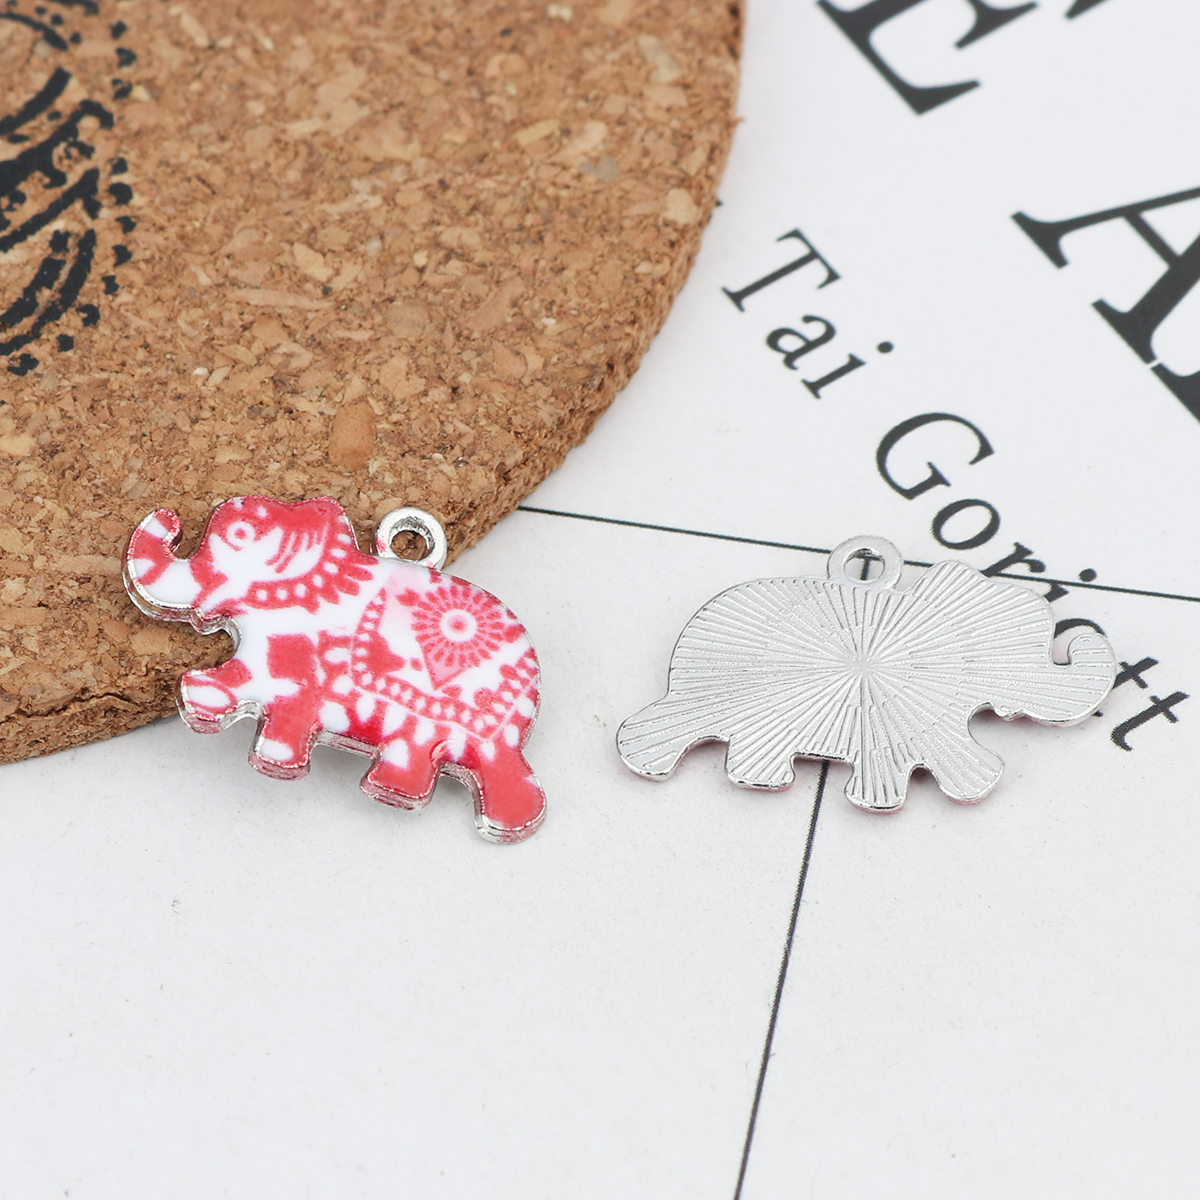 Picture of Zinc Based Alloy Charms Elephant Animal Silver Tone White & Red Enamel 24mm x 16mm, 10 PCs